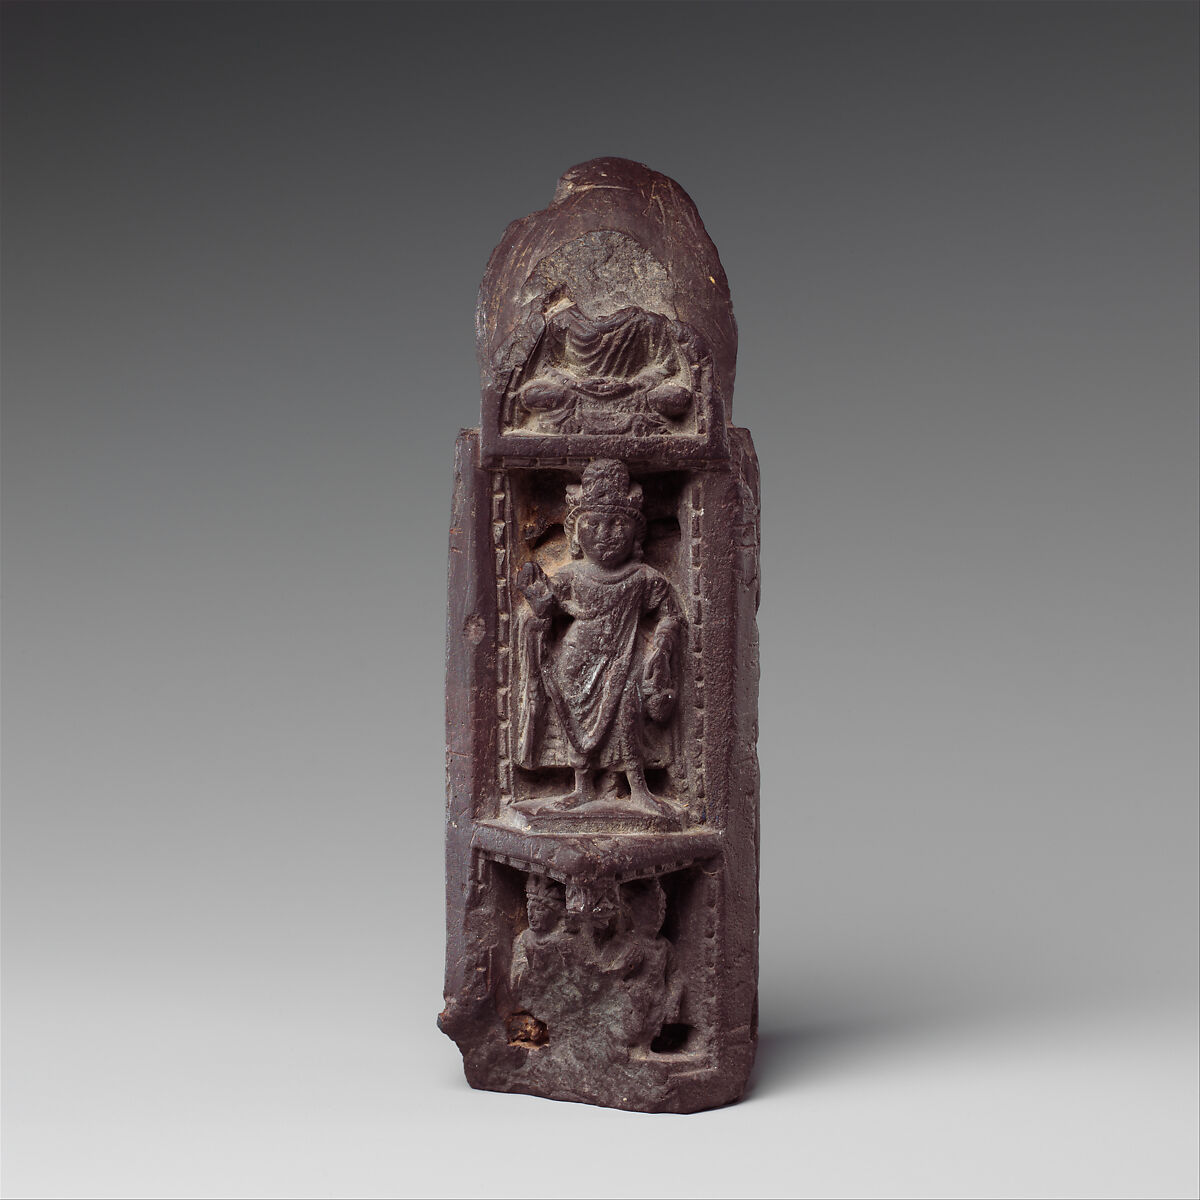 Three-Sided Section of a Portable Shrine with Scenes from the Life of the Buddha, Phyllitic schist, Pakistan (ancient region of Gandhara) 